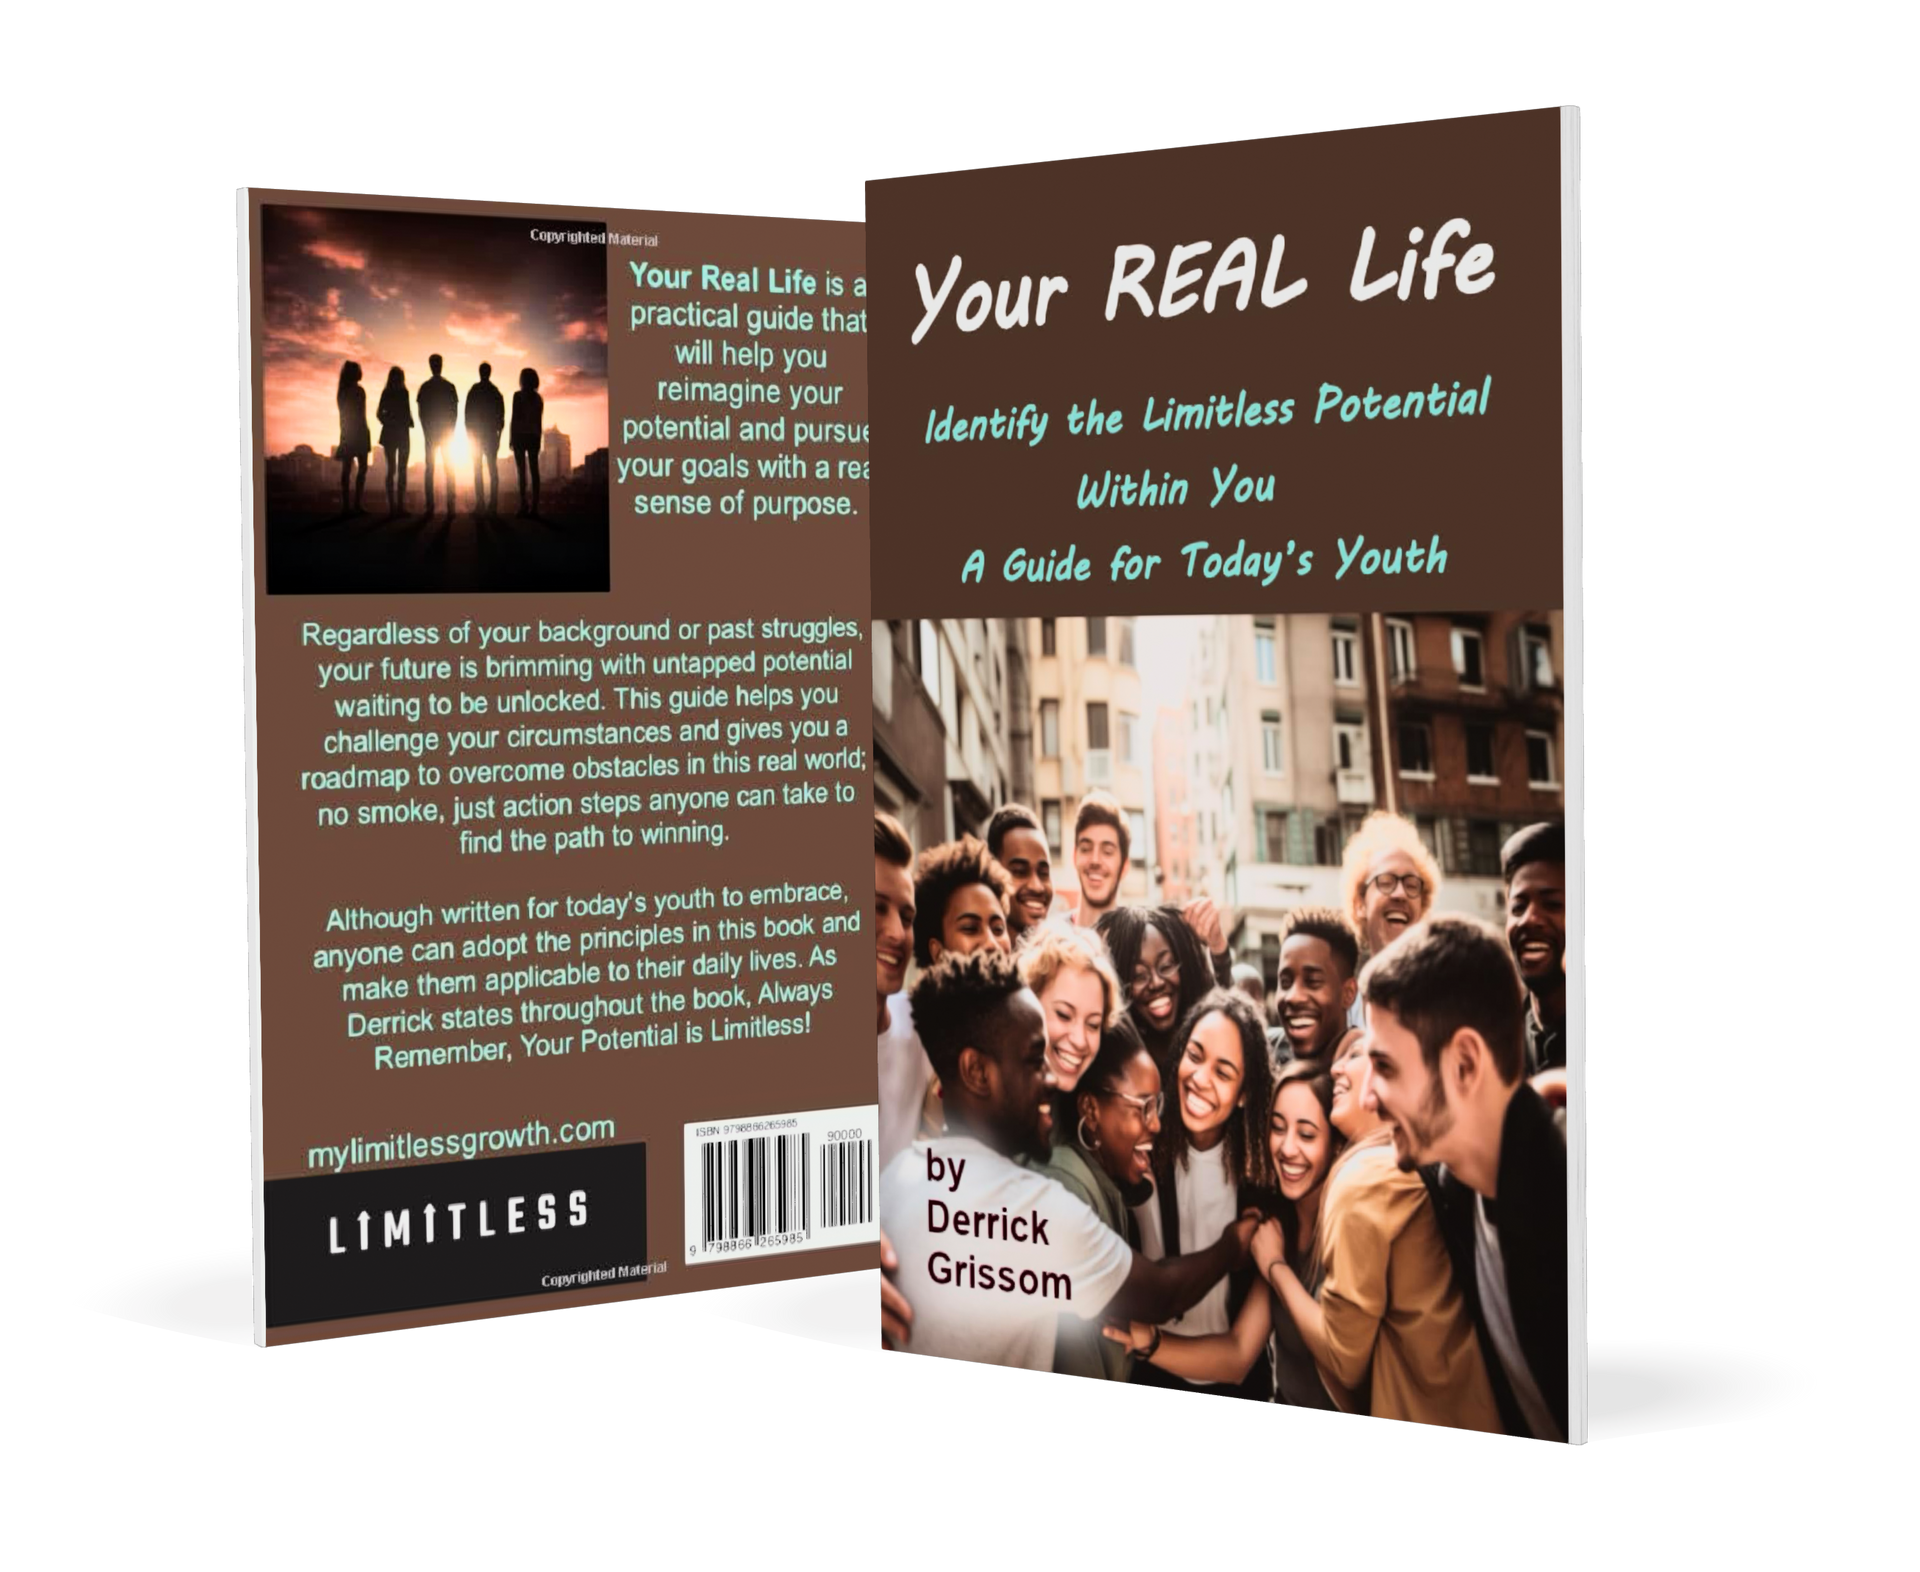 Your Real Life by Derrick Grissom 